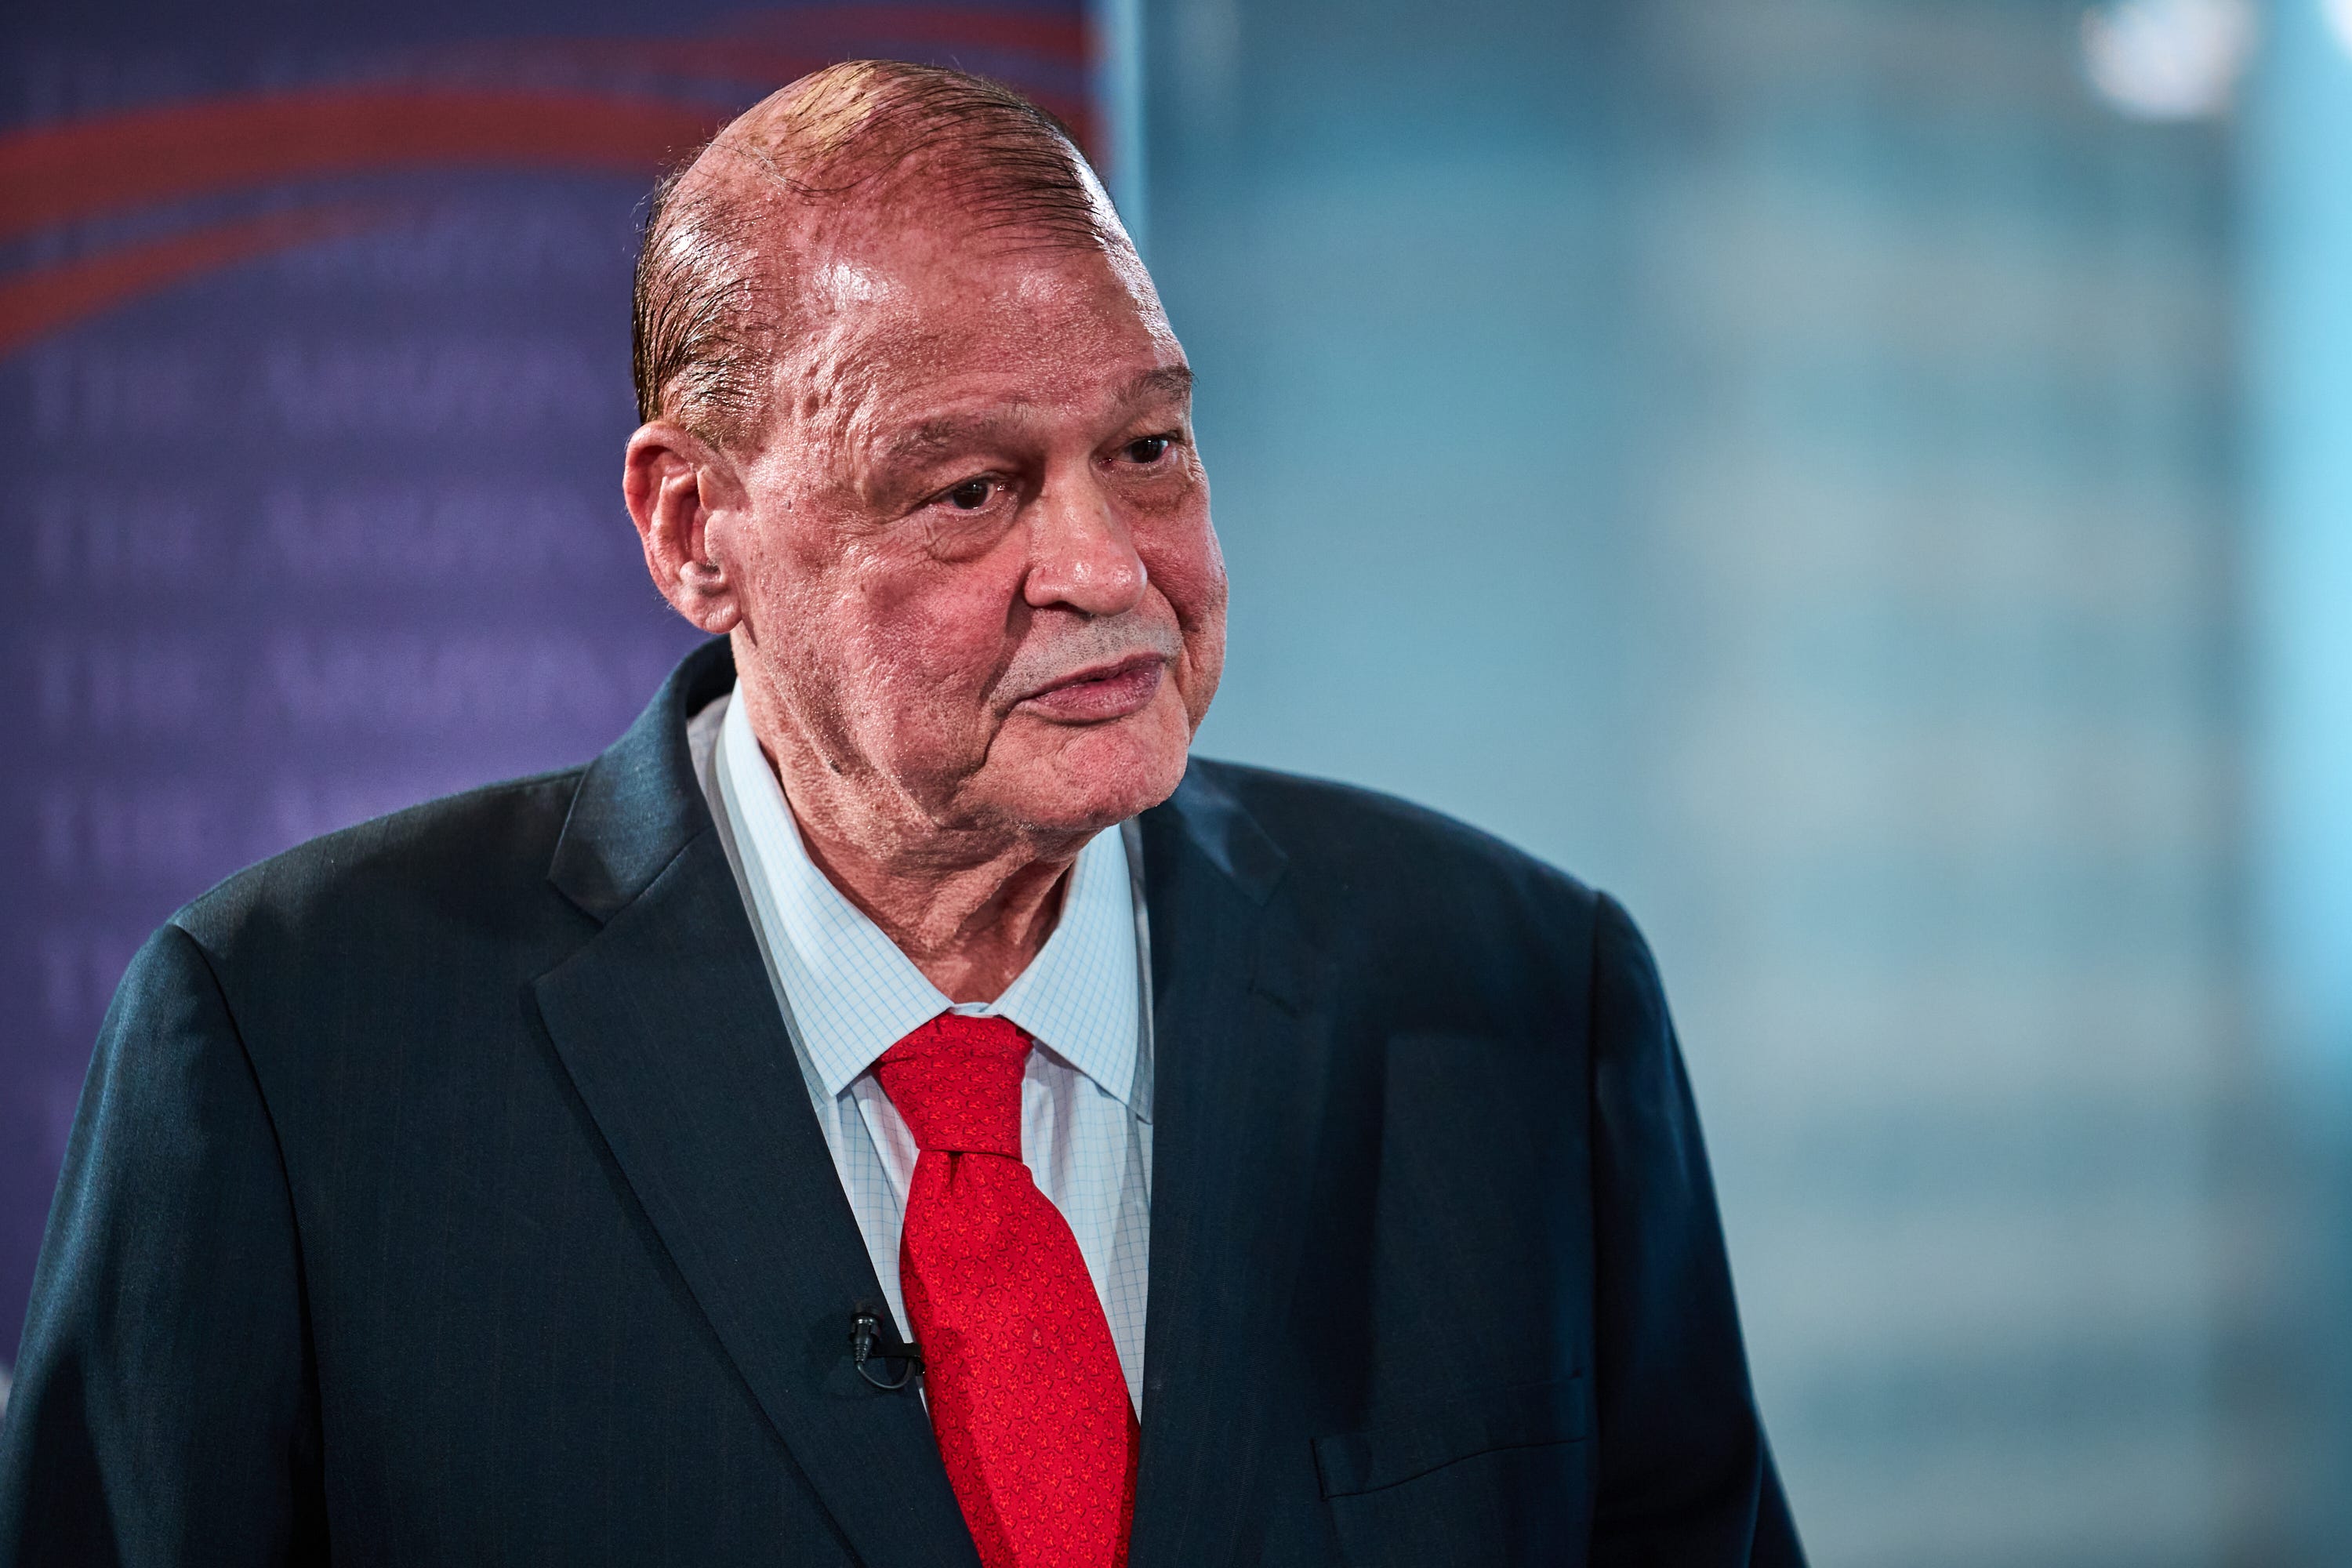 Image of Tom Horne, AZ State Superintendent of Public Instruction, Republican Party